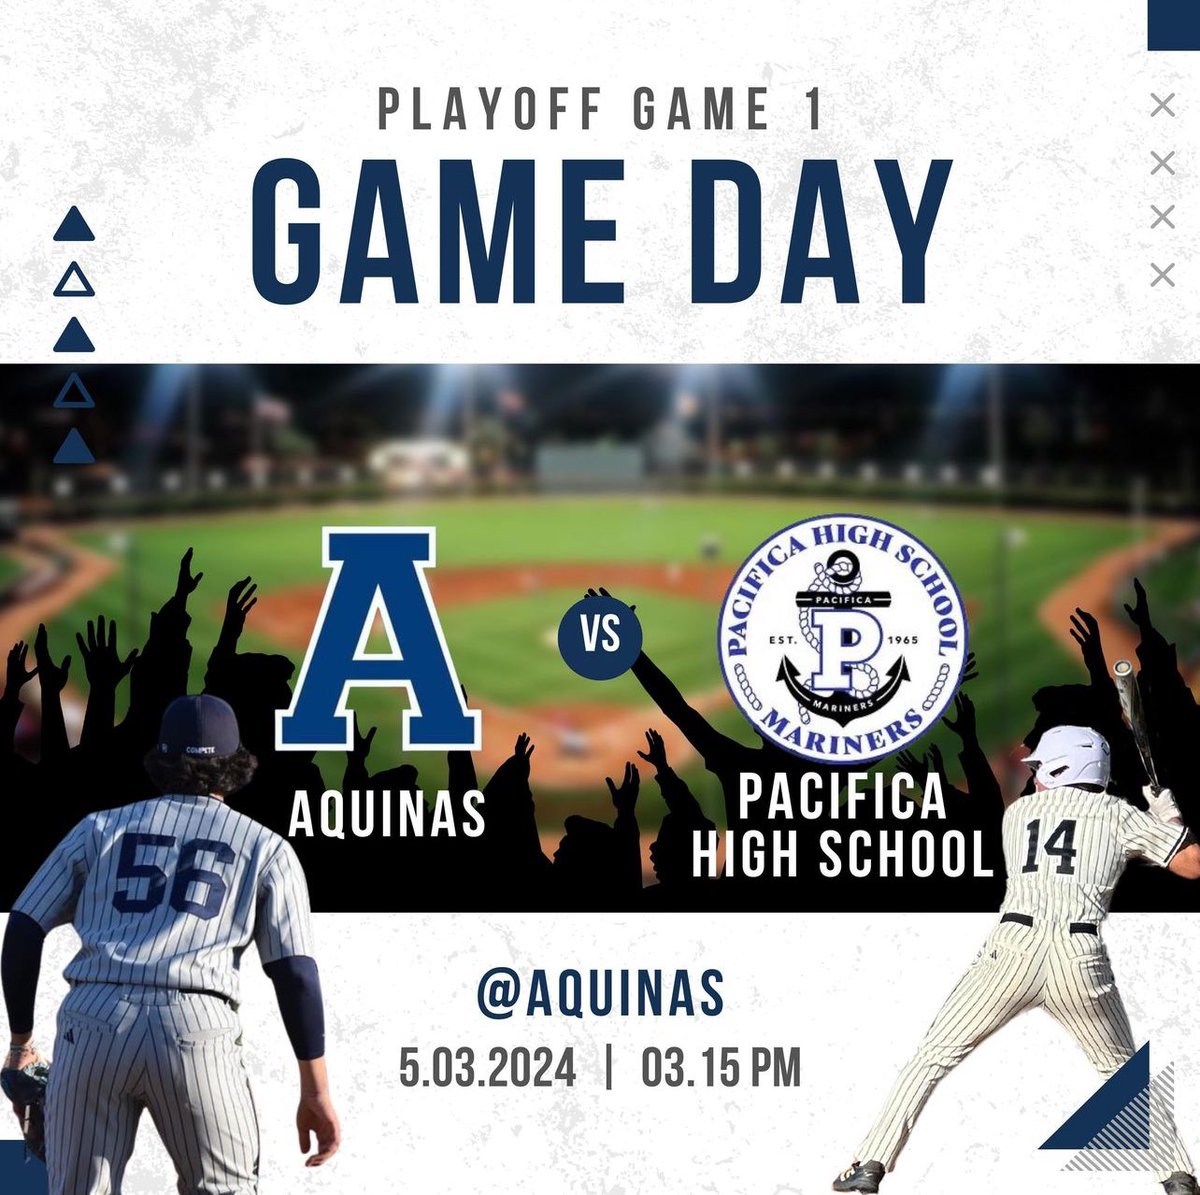 GAME. DAY!! Round 1 for @AquinasBasebal1 @AquinasAthSB @CIFSS D1 with a chance to make history on the line with a win. That’ll give Falcons 🦅 head coach Mike Carpentier 100th HS career WIN! Let’s make history and be a part of something special. Come pack the nest! #Compete